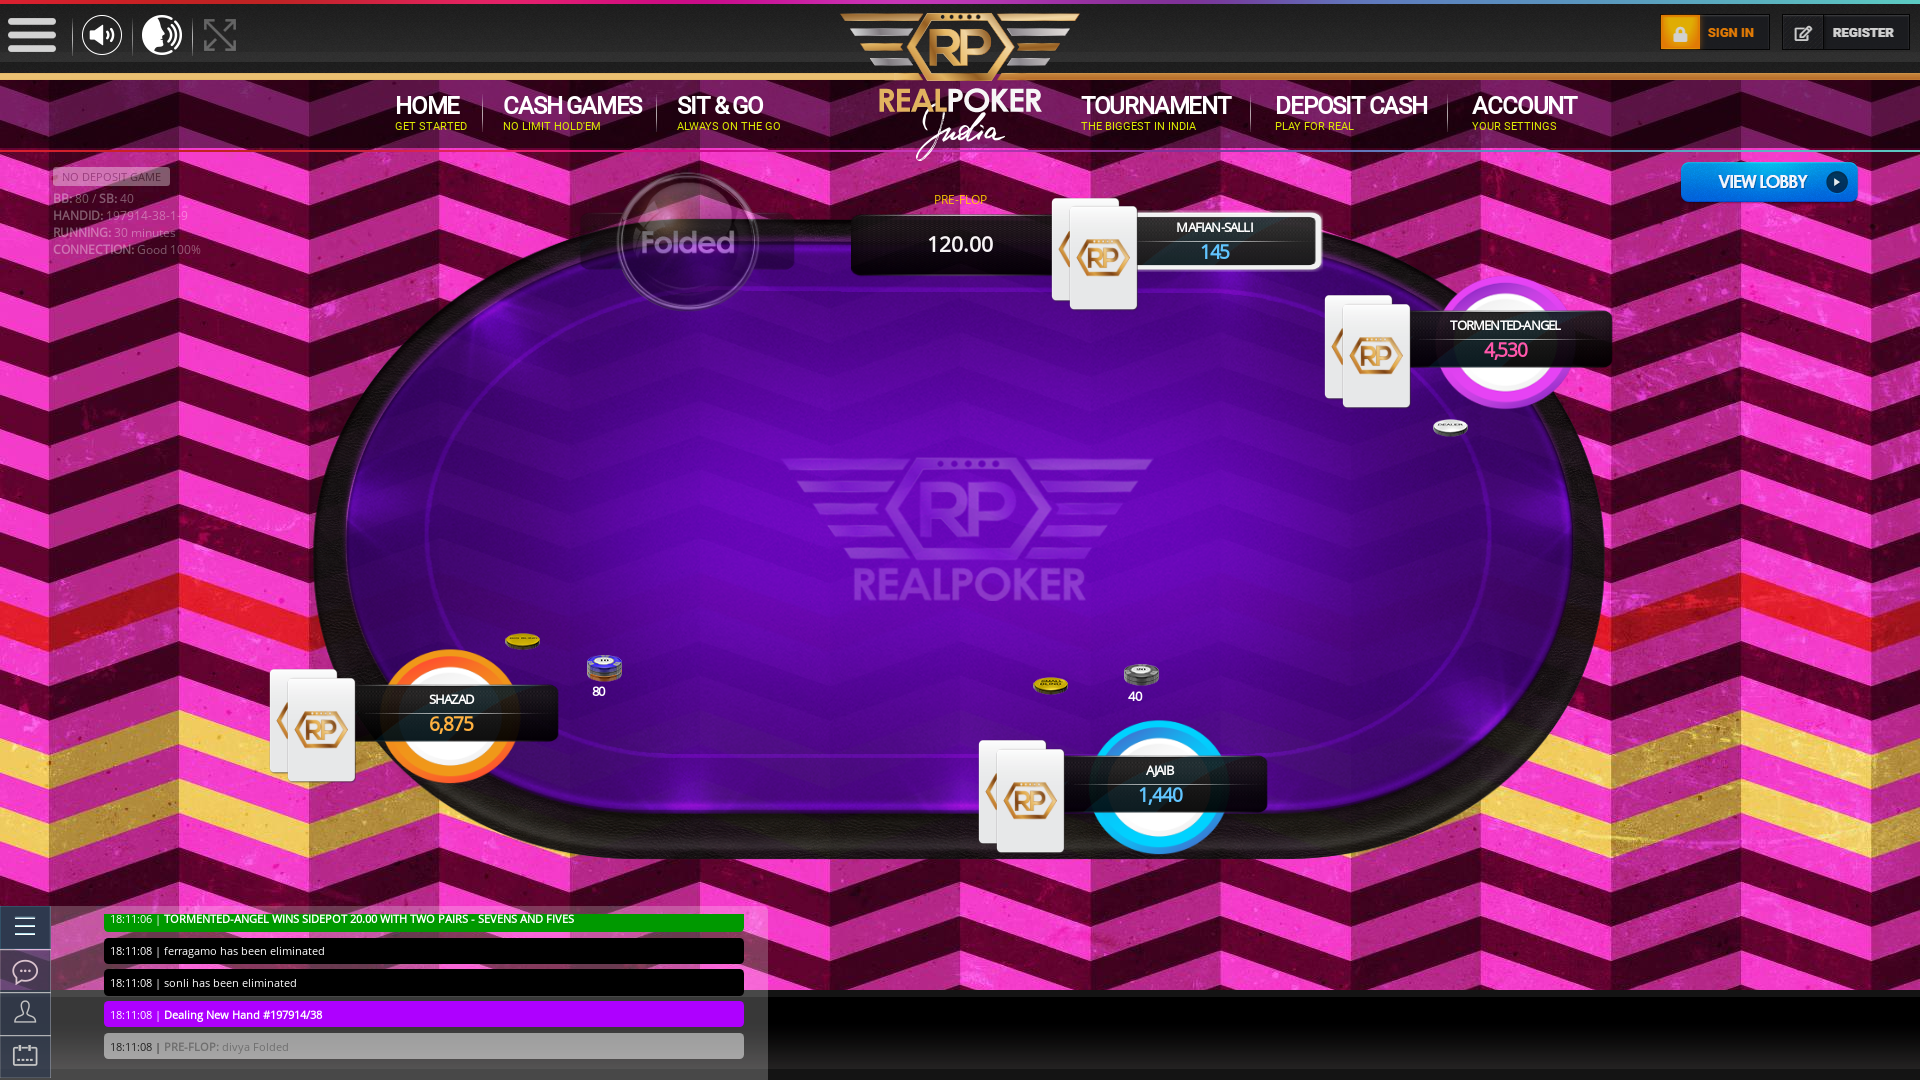 BTM Layout, Bangalore poker table on a 10 player table in the 29th minute of the meeting